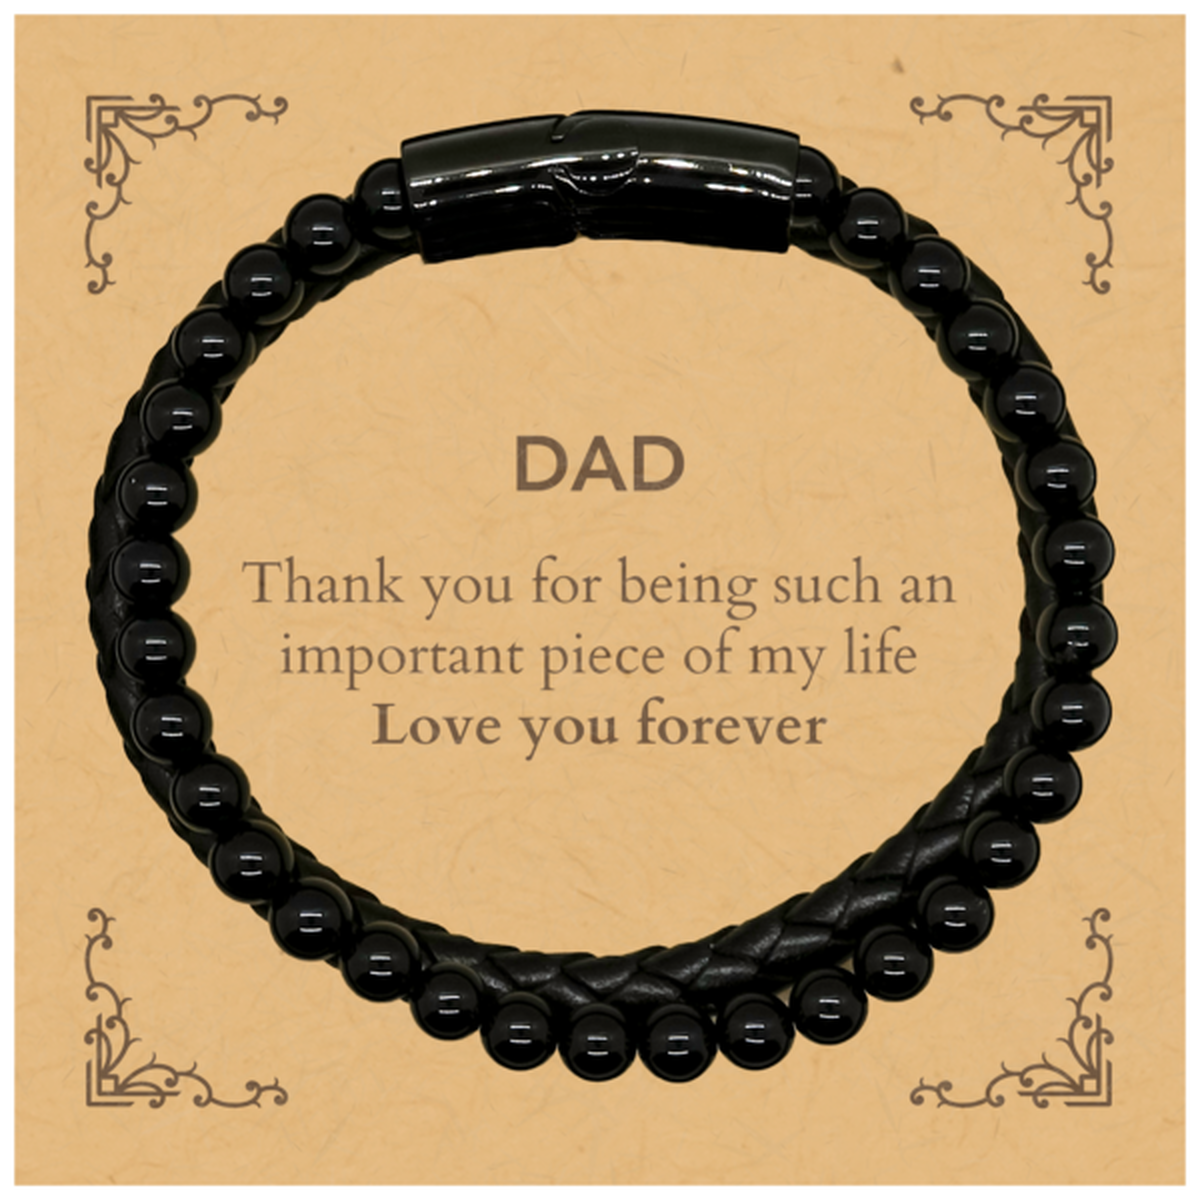 Appropriate Dad Stone Leather Bracelets Epic Birthday Gifts for Dad Thank you for being such an important piece of my life Dad Christmas Mothers Fathers Day